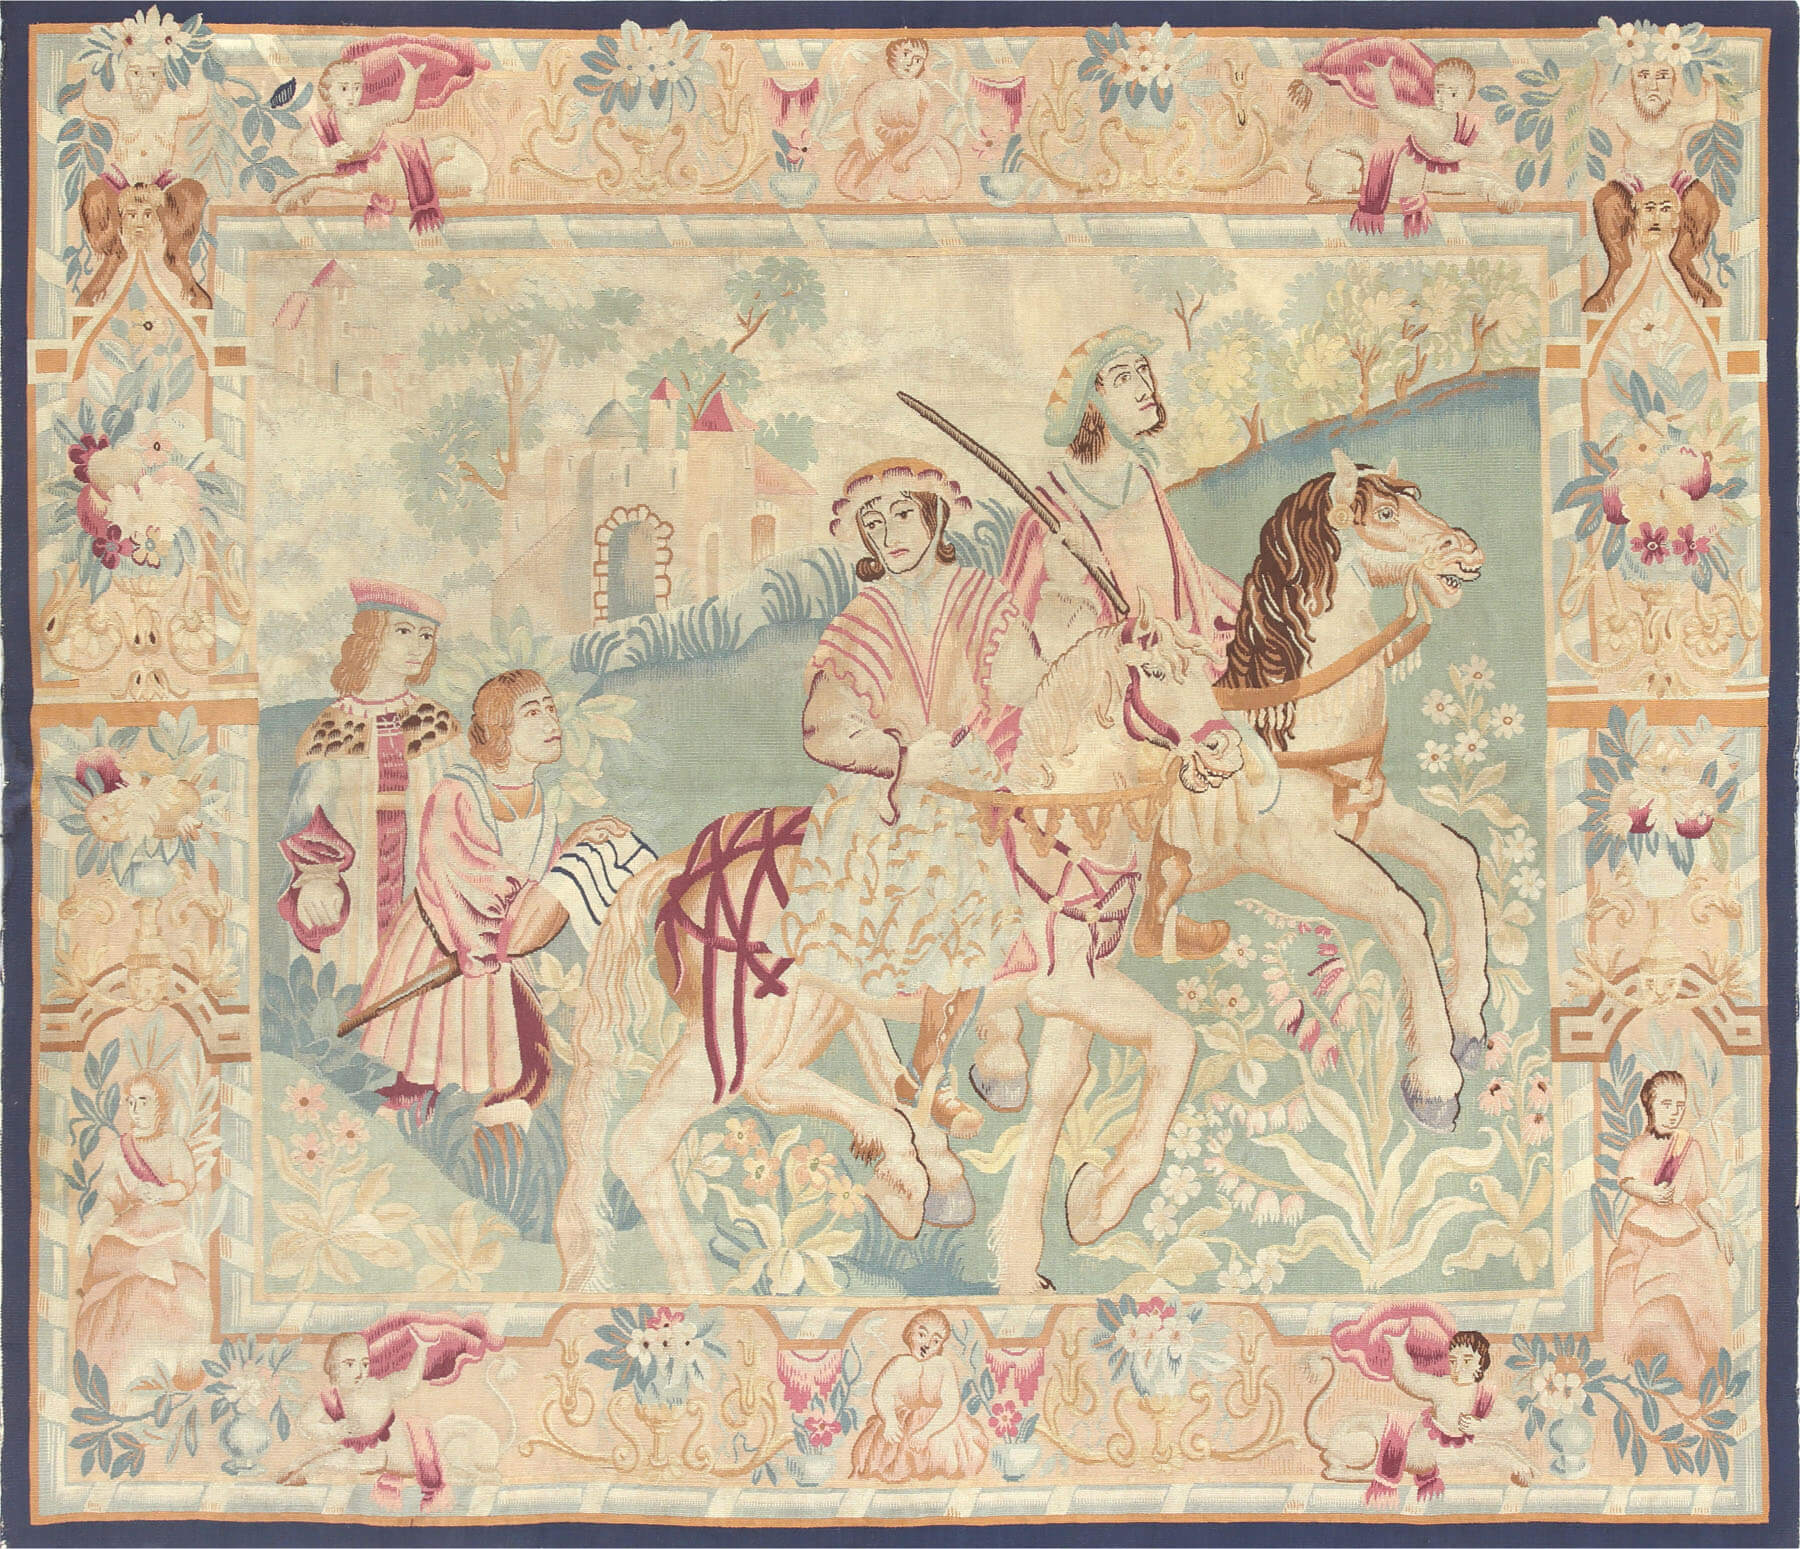 Antique French Aubusson Tapestry - 5'10" x 6'7"